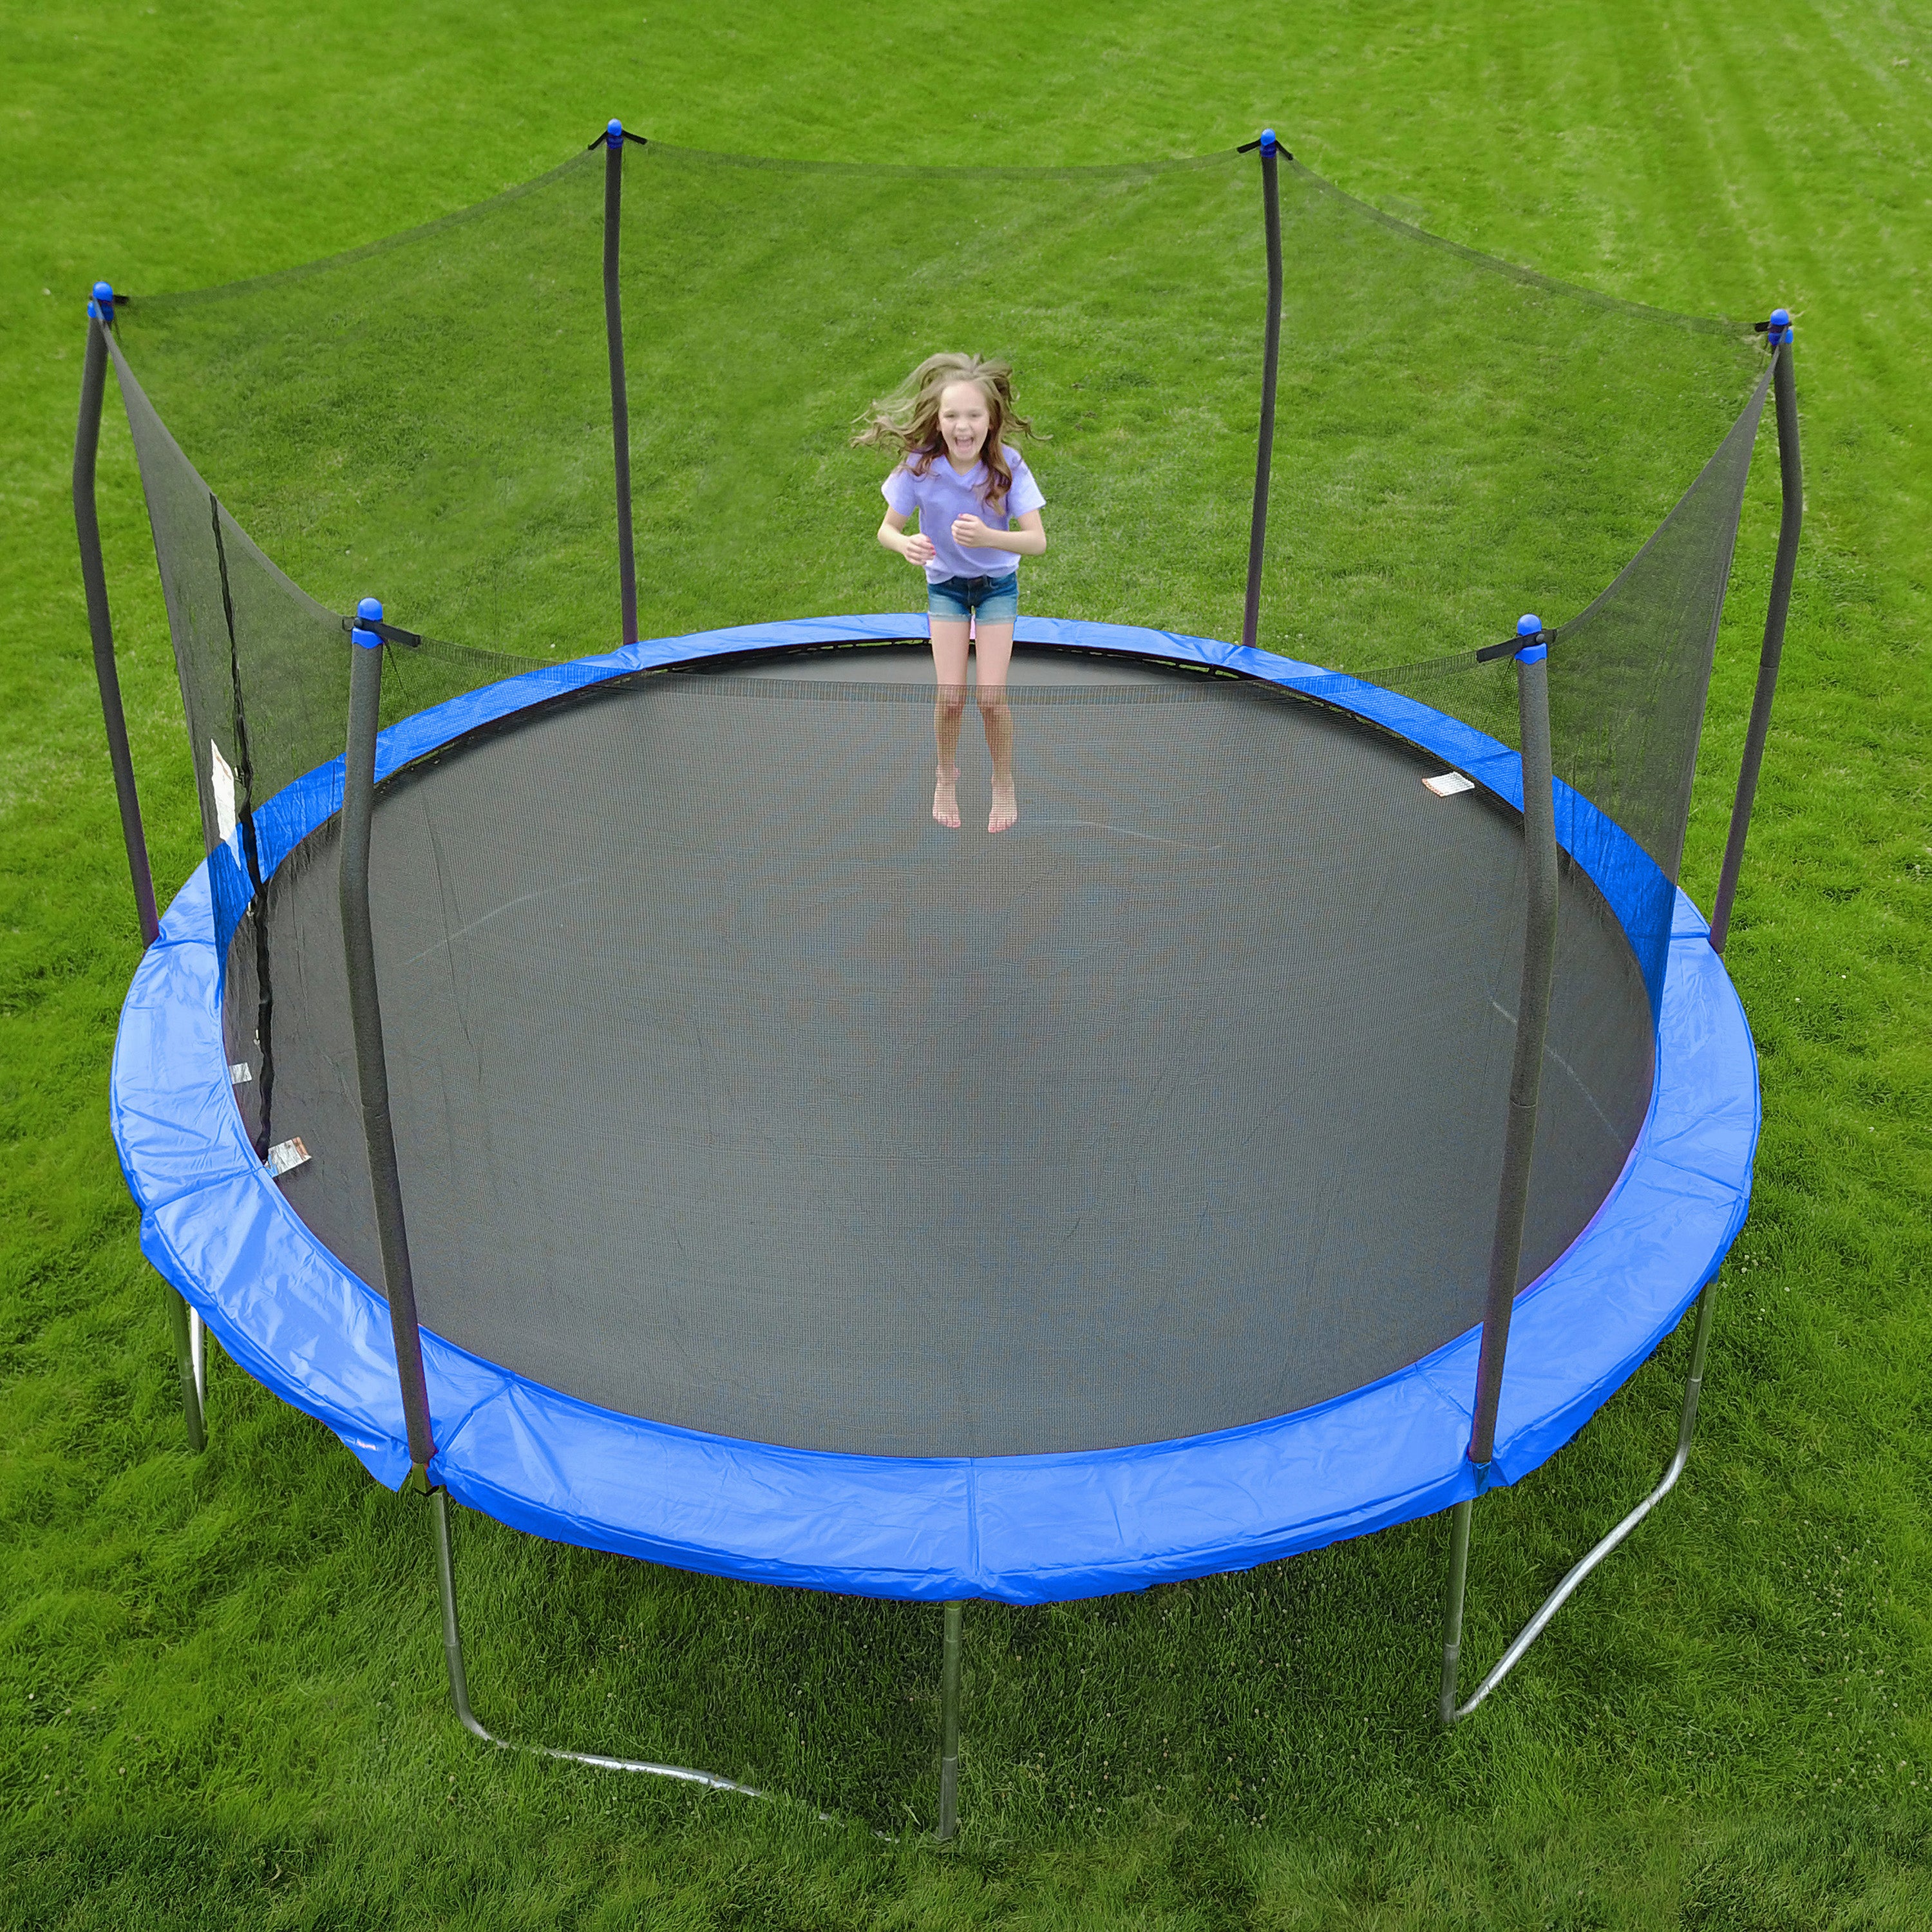 14' Round Trampoline with Enclosure and Wind Stakes - Bright Blue